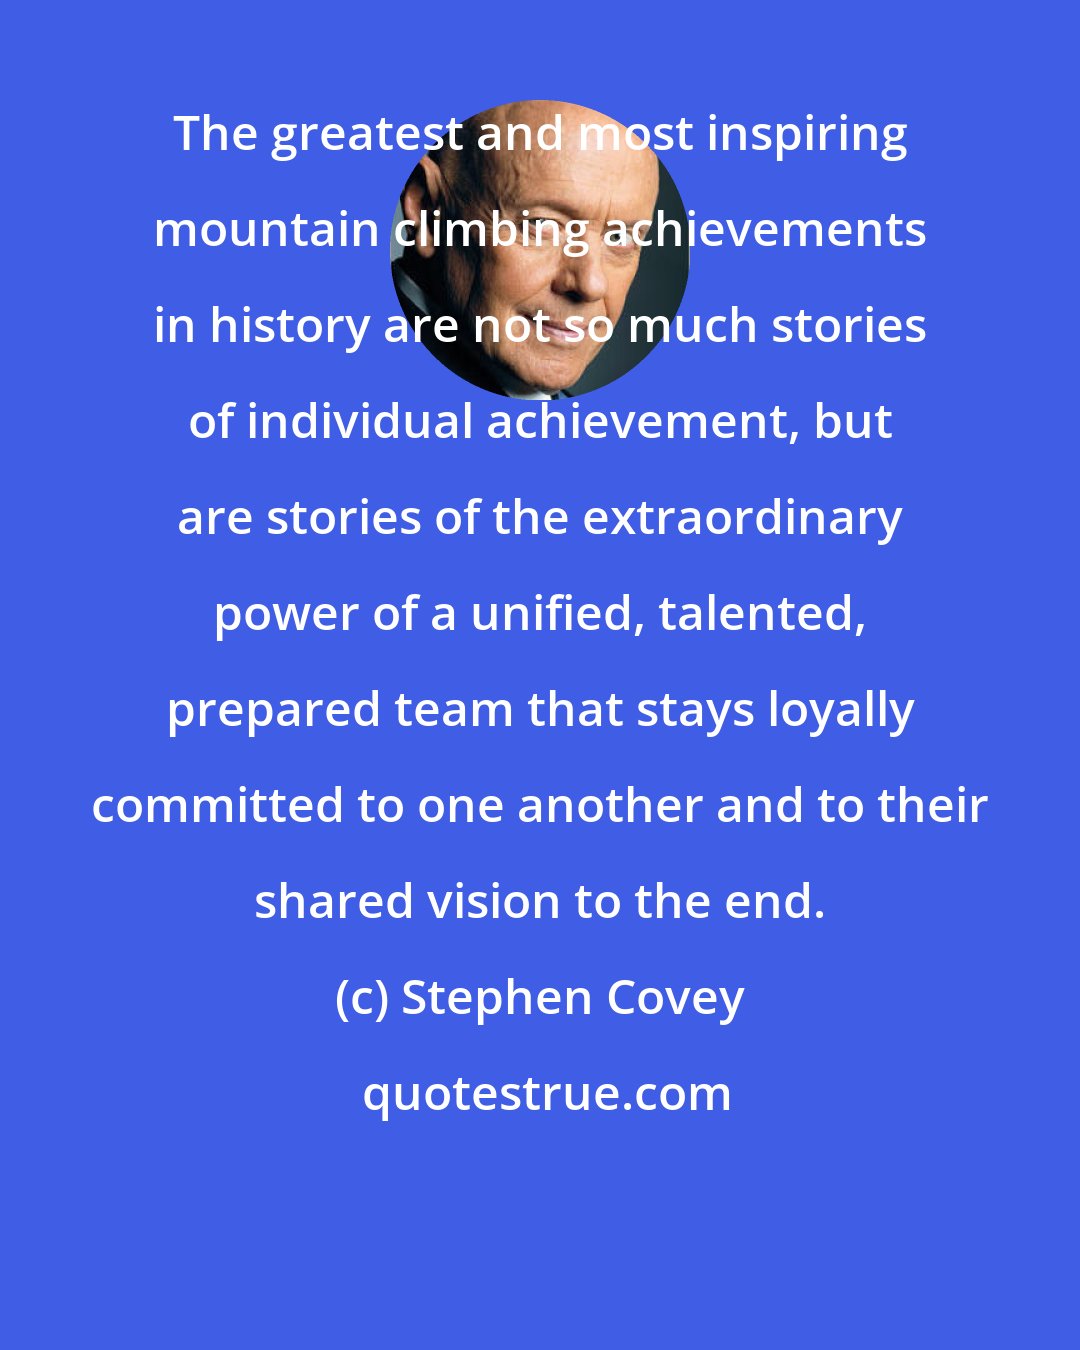 Stephen Covey: The greatest and most inspiring mountain climbing achievements in history are not so much stories of individual achievement, but are stories of the extraordinary power of a unified, talented, prepared team that stays loyally committed to one another and to their shared vision to the end.